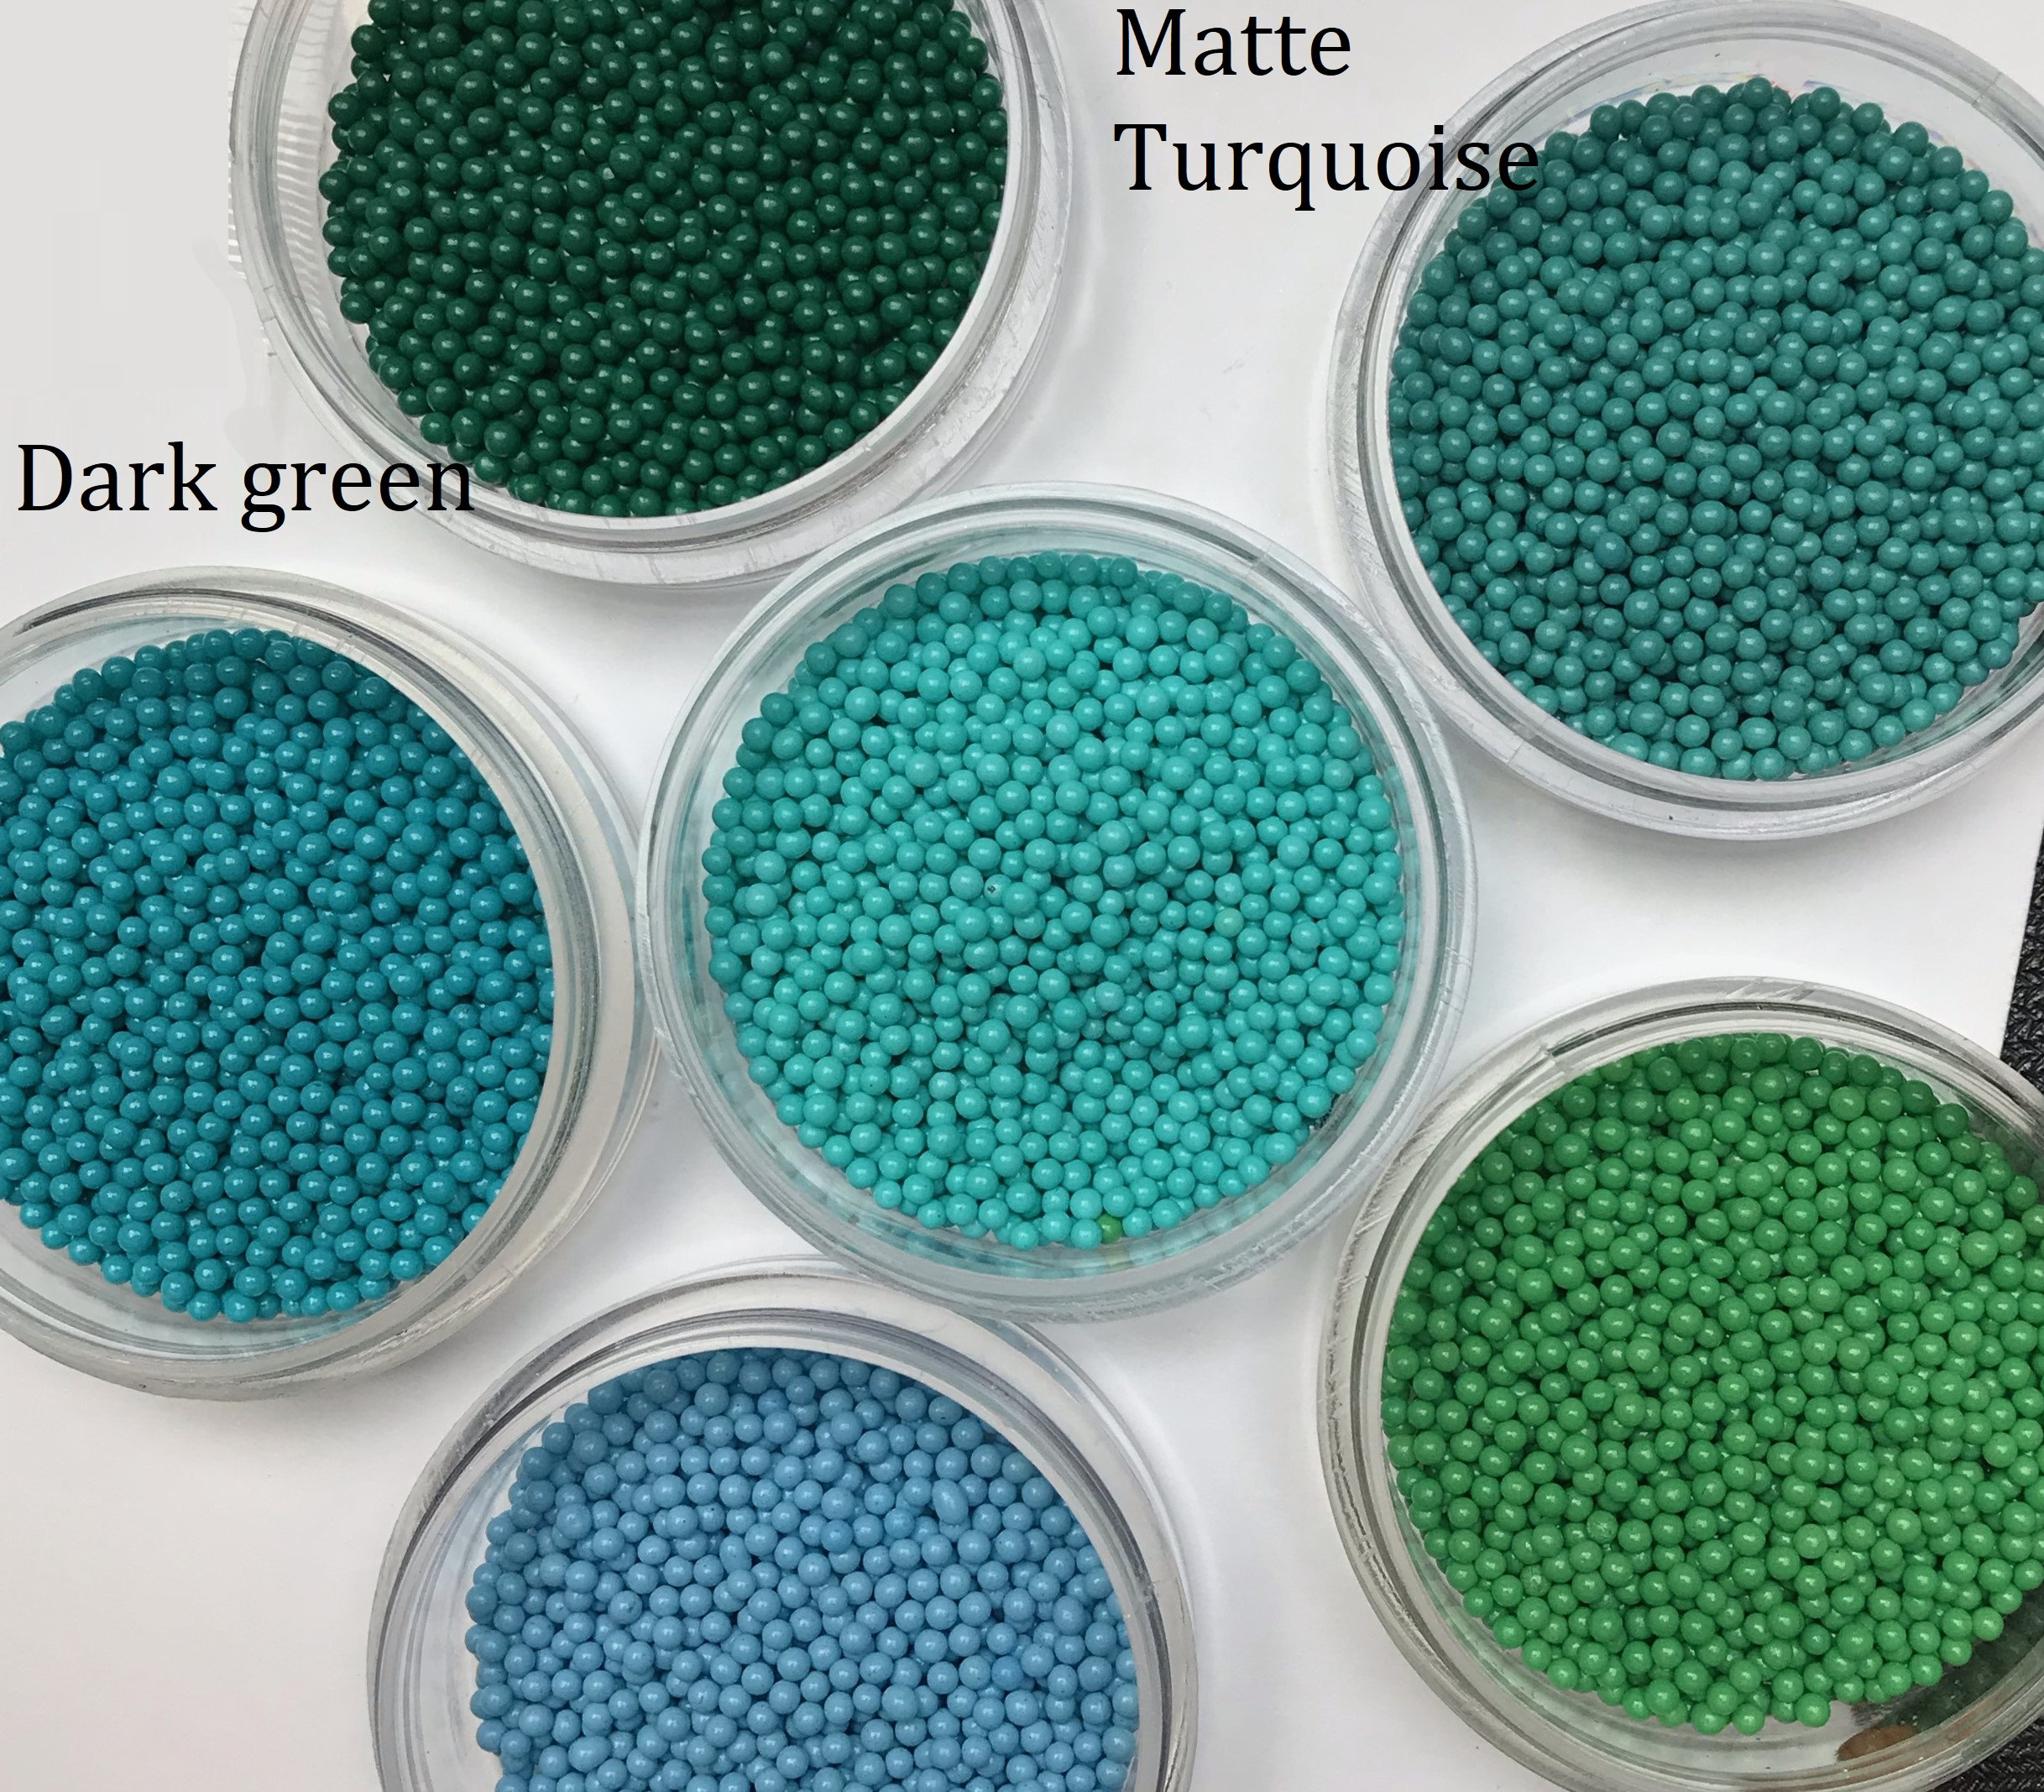 450g/Bag 2mm Small Round Loose Beads Accessories Non Porous Solid Glass  Rice Beads Filler Color Baking Paint Micro Balls